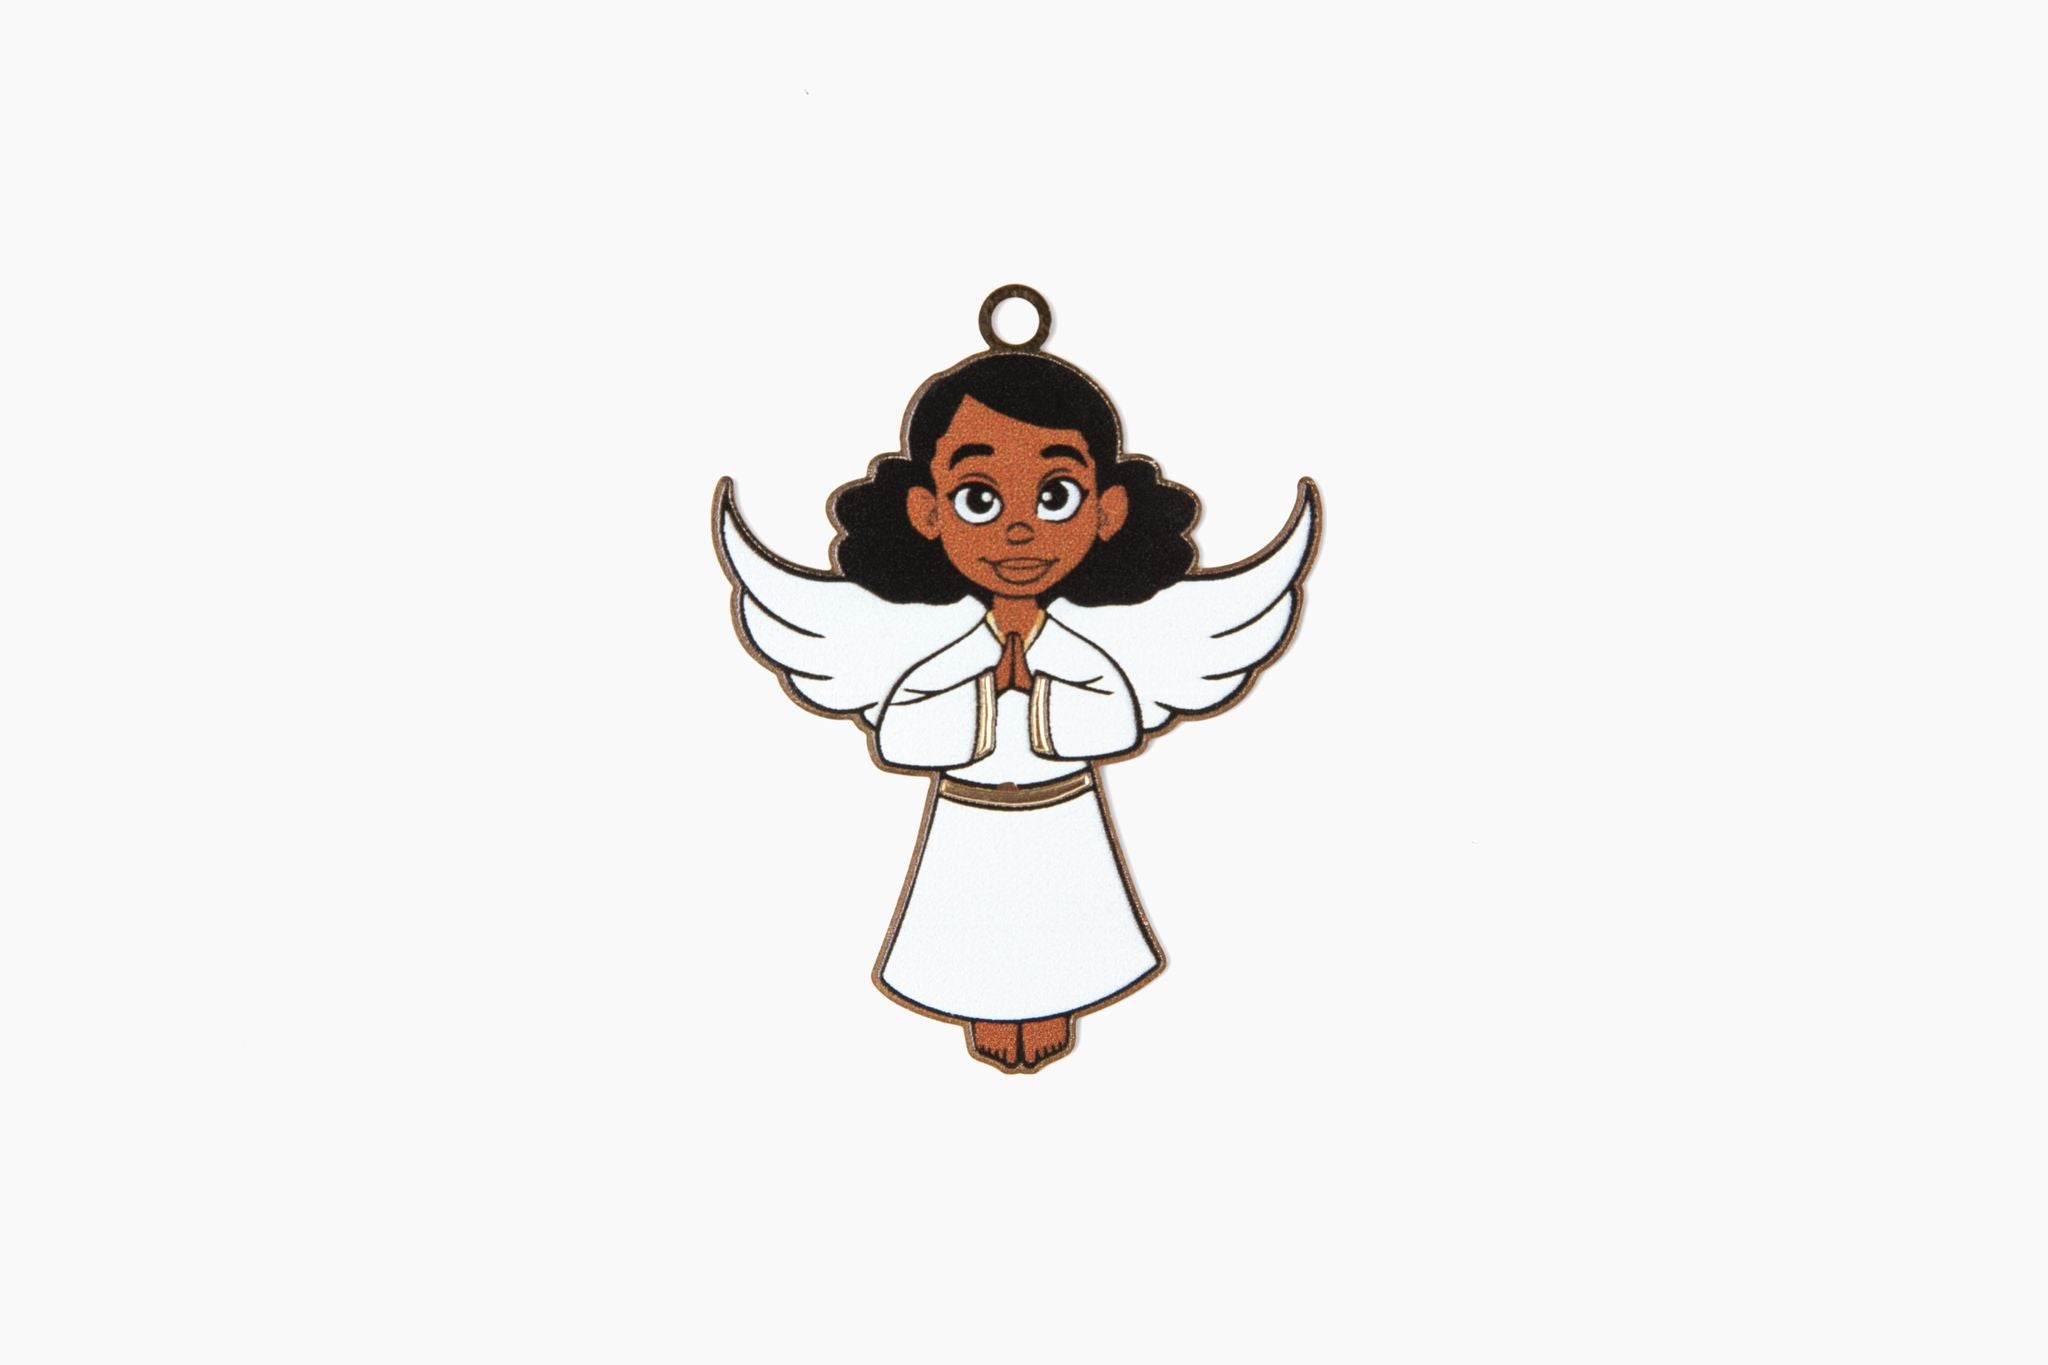 an ornament front featuring a black angel in a white dress and wing